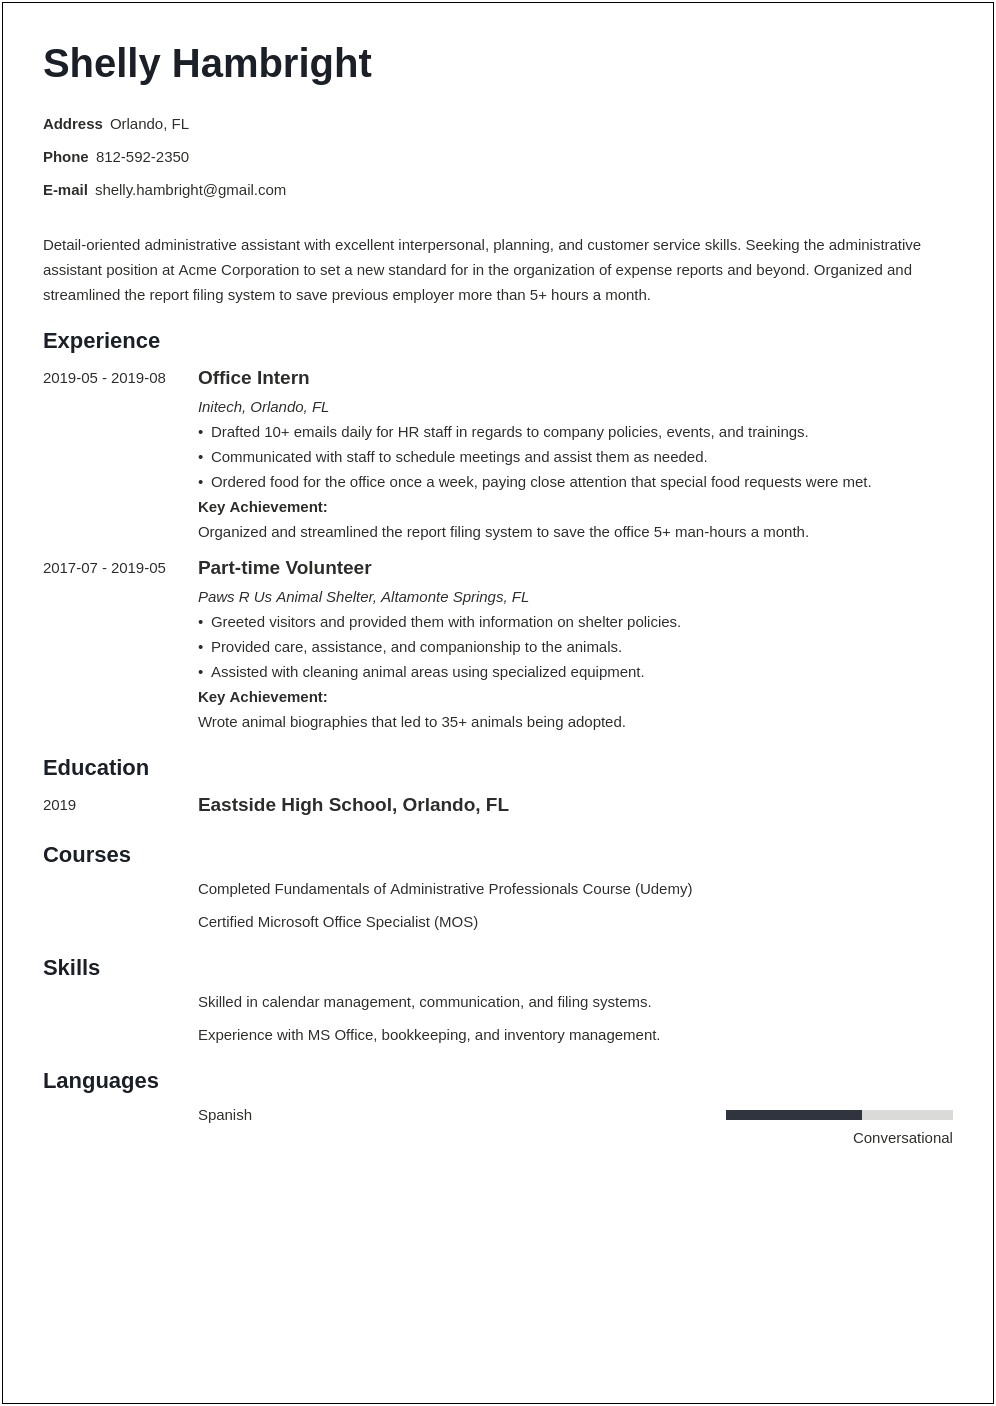 Resume Examples For Property Management Office Assistant